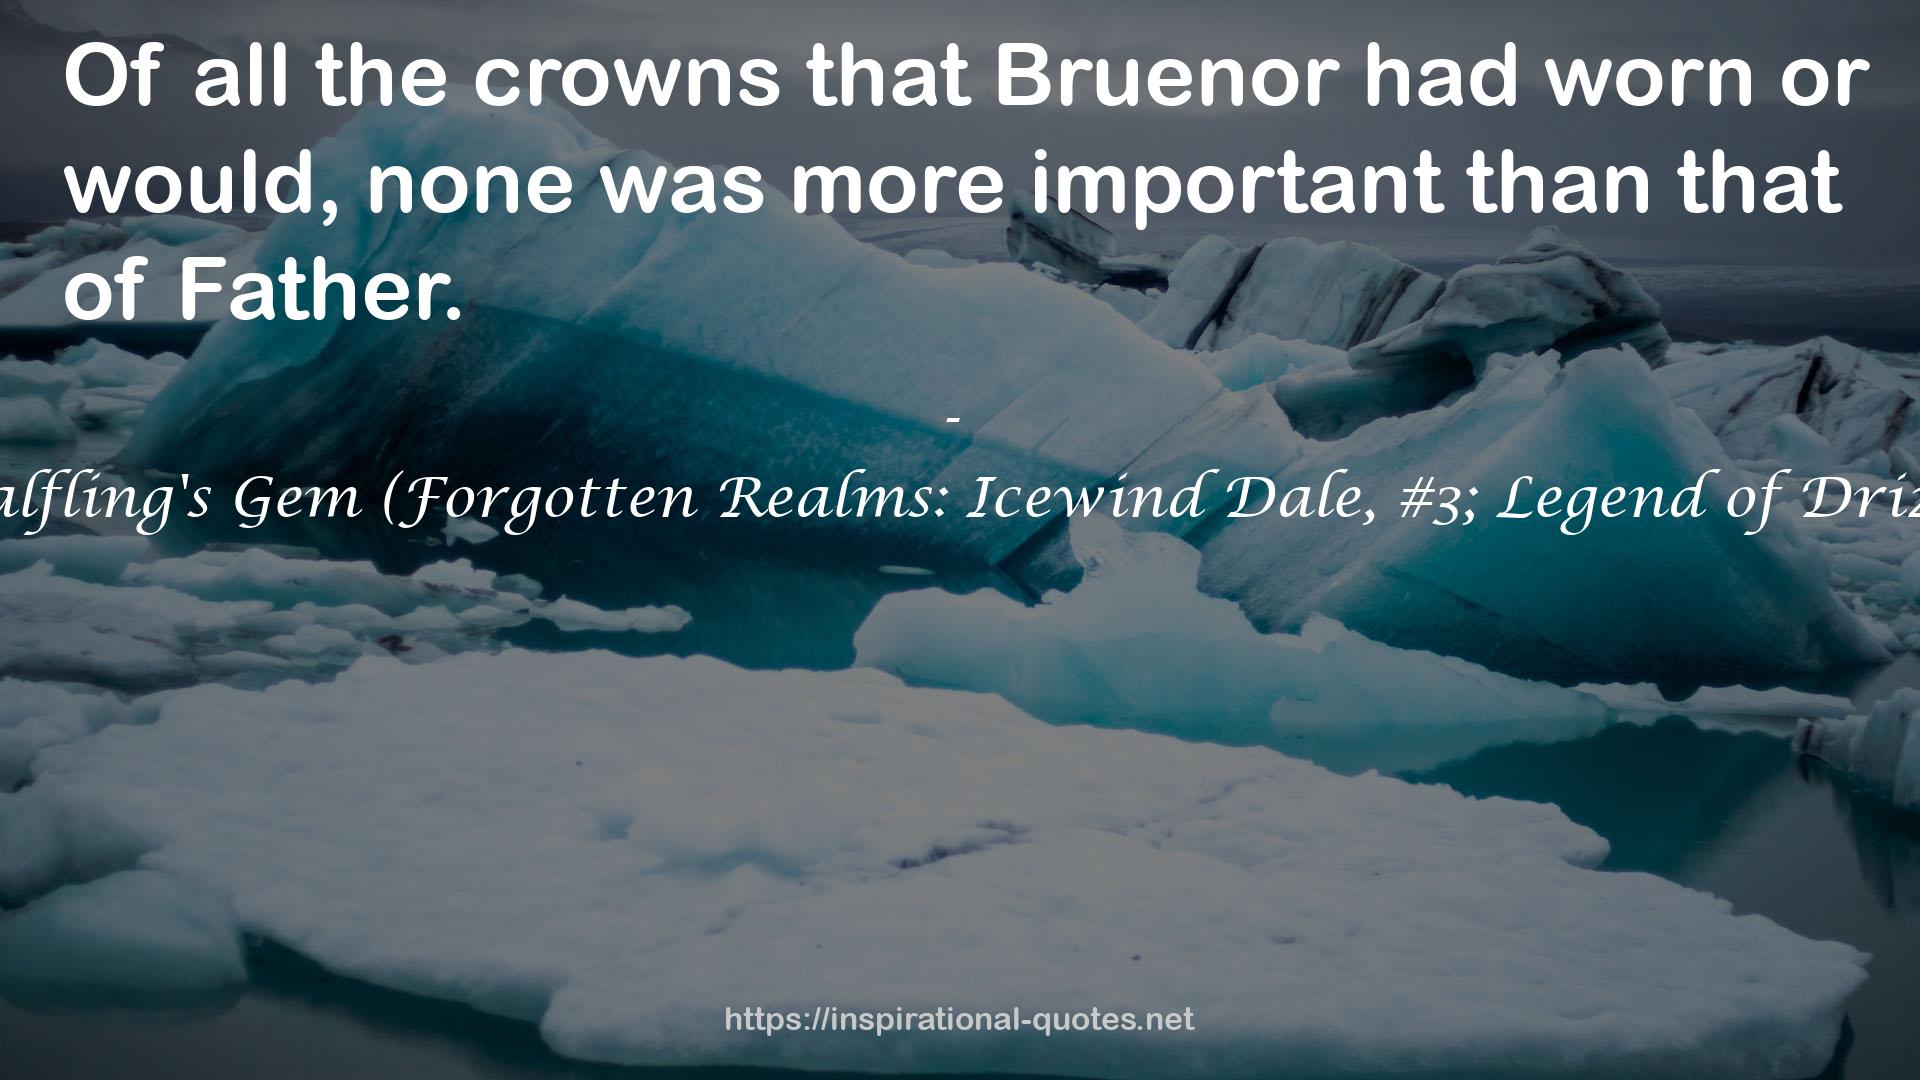 The Halfling's Gem (Forgotten Realms: Icewind Dale, #3; Legend of Drizzt, #6) QUOTES